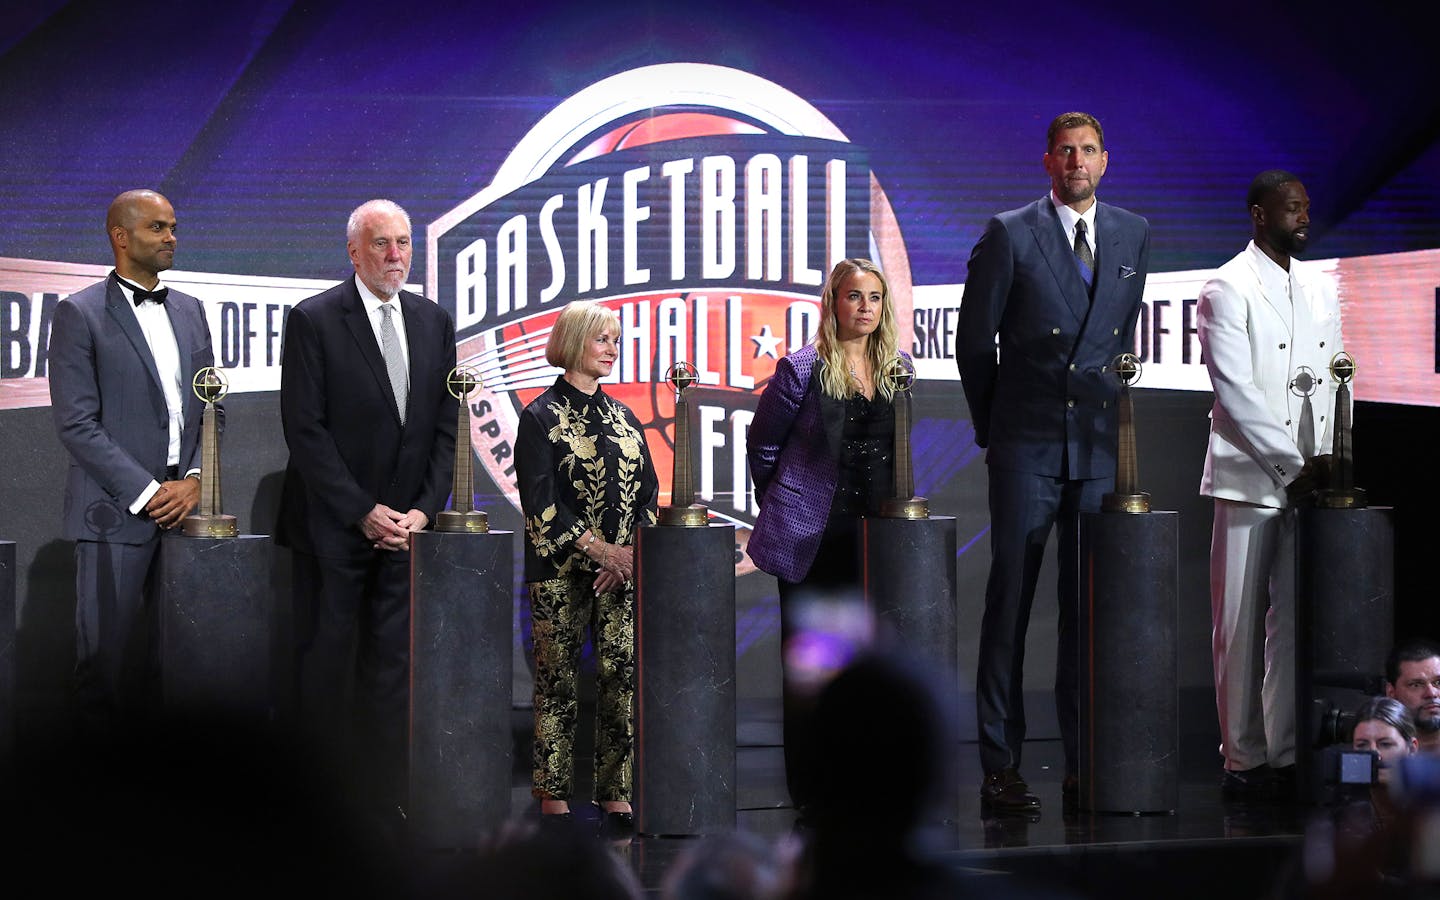 France's Tony Parker enters the NBA Hall of Fame: 'It was an